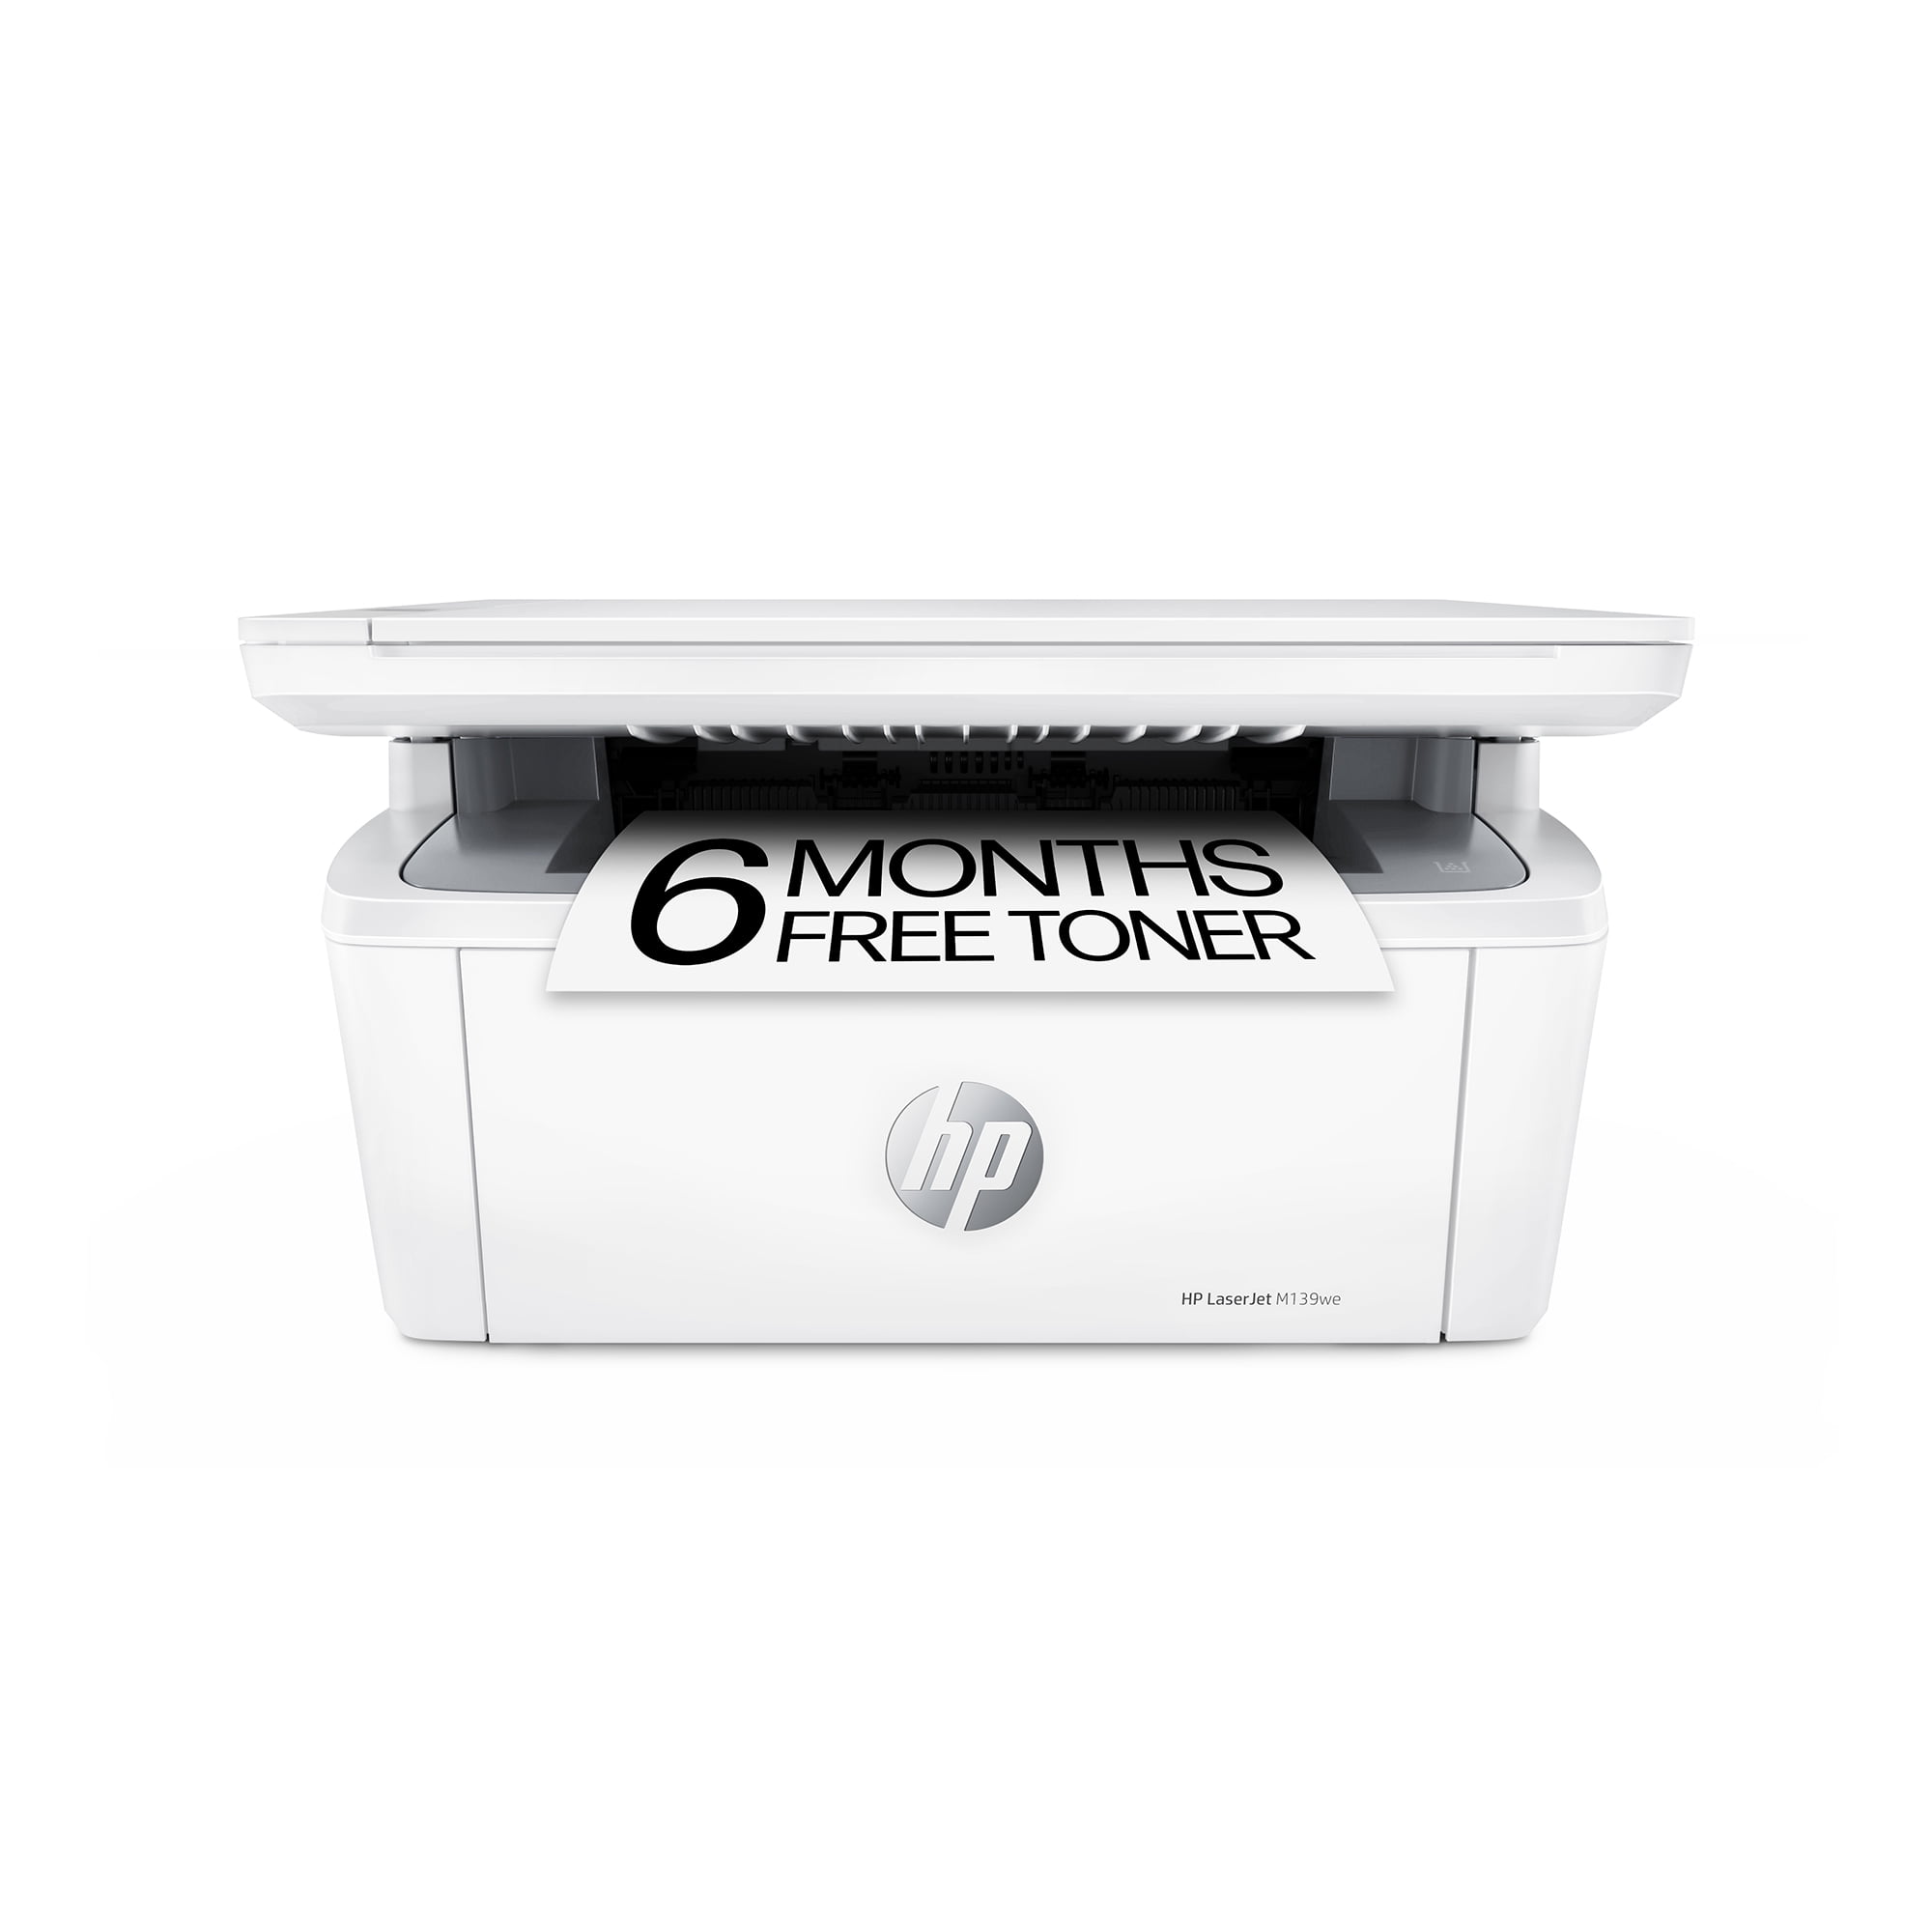 HP LaserJet MFP M139we Wireless Black & White Laser Printer with 6 Months Instant Ink included with HP+ - Walmart.com